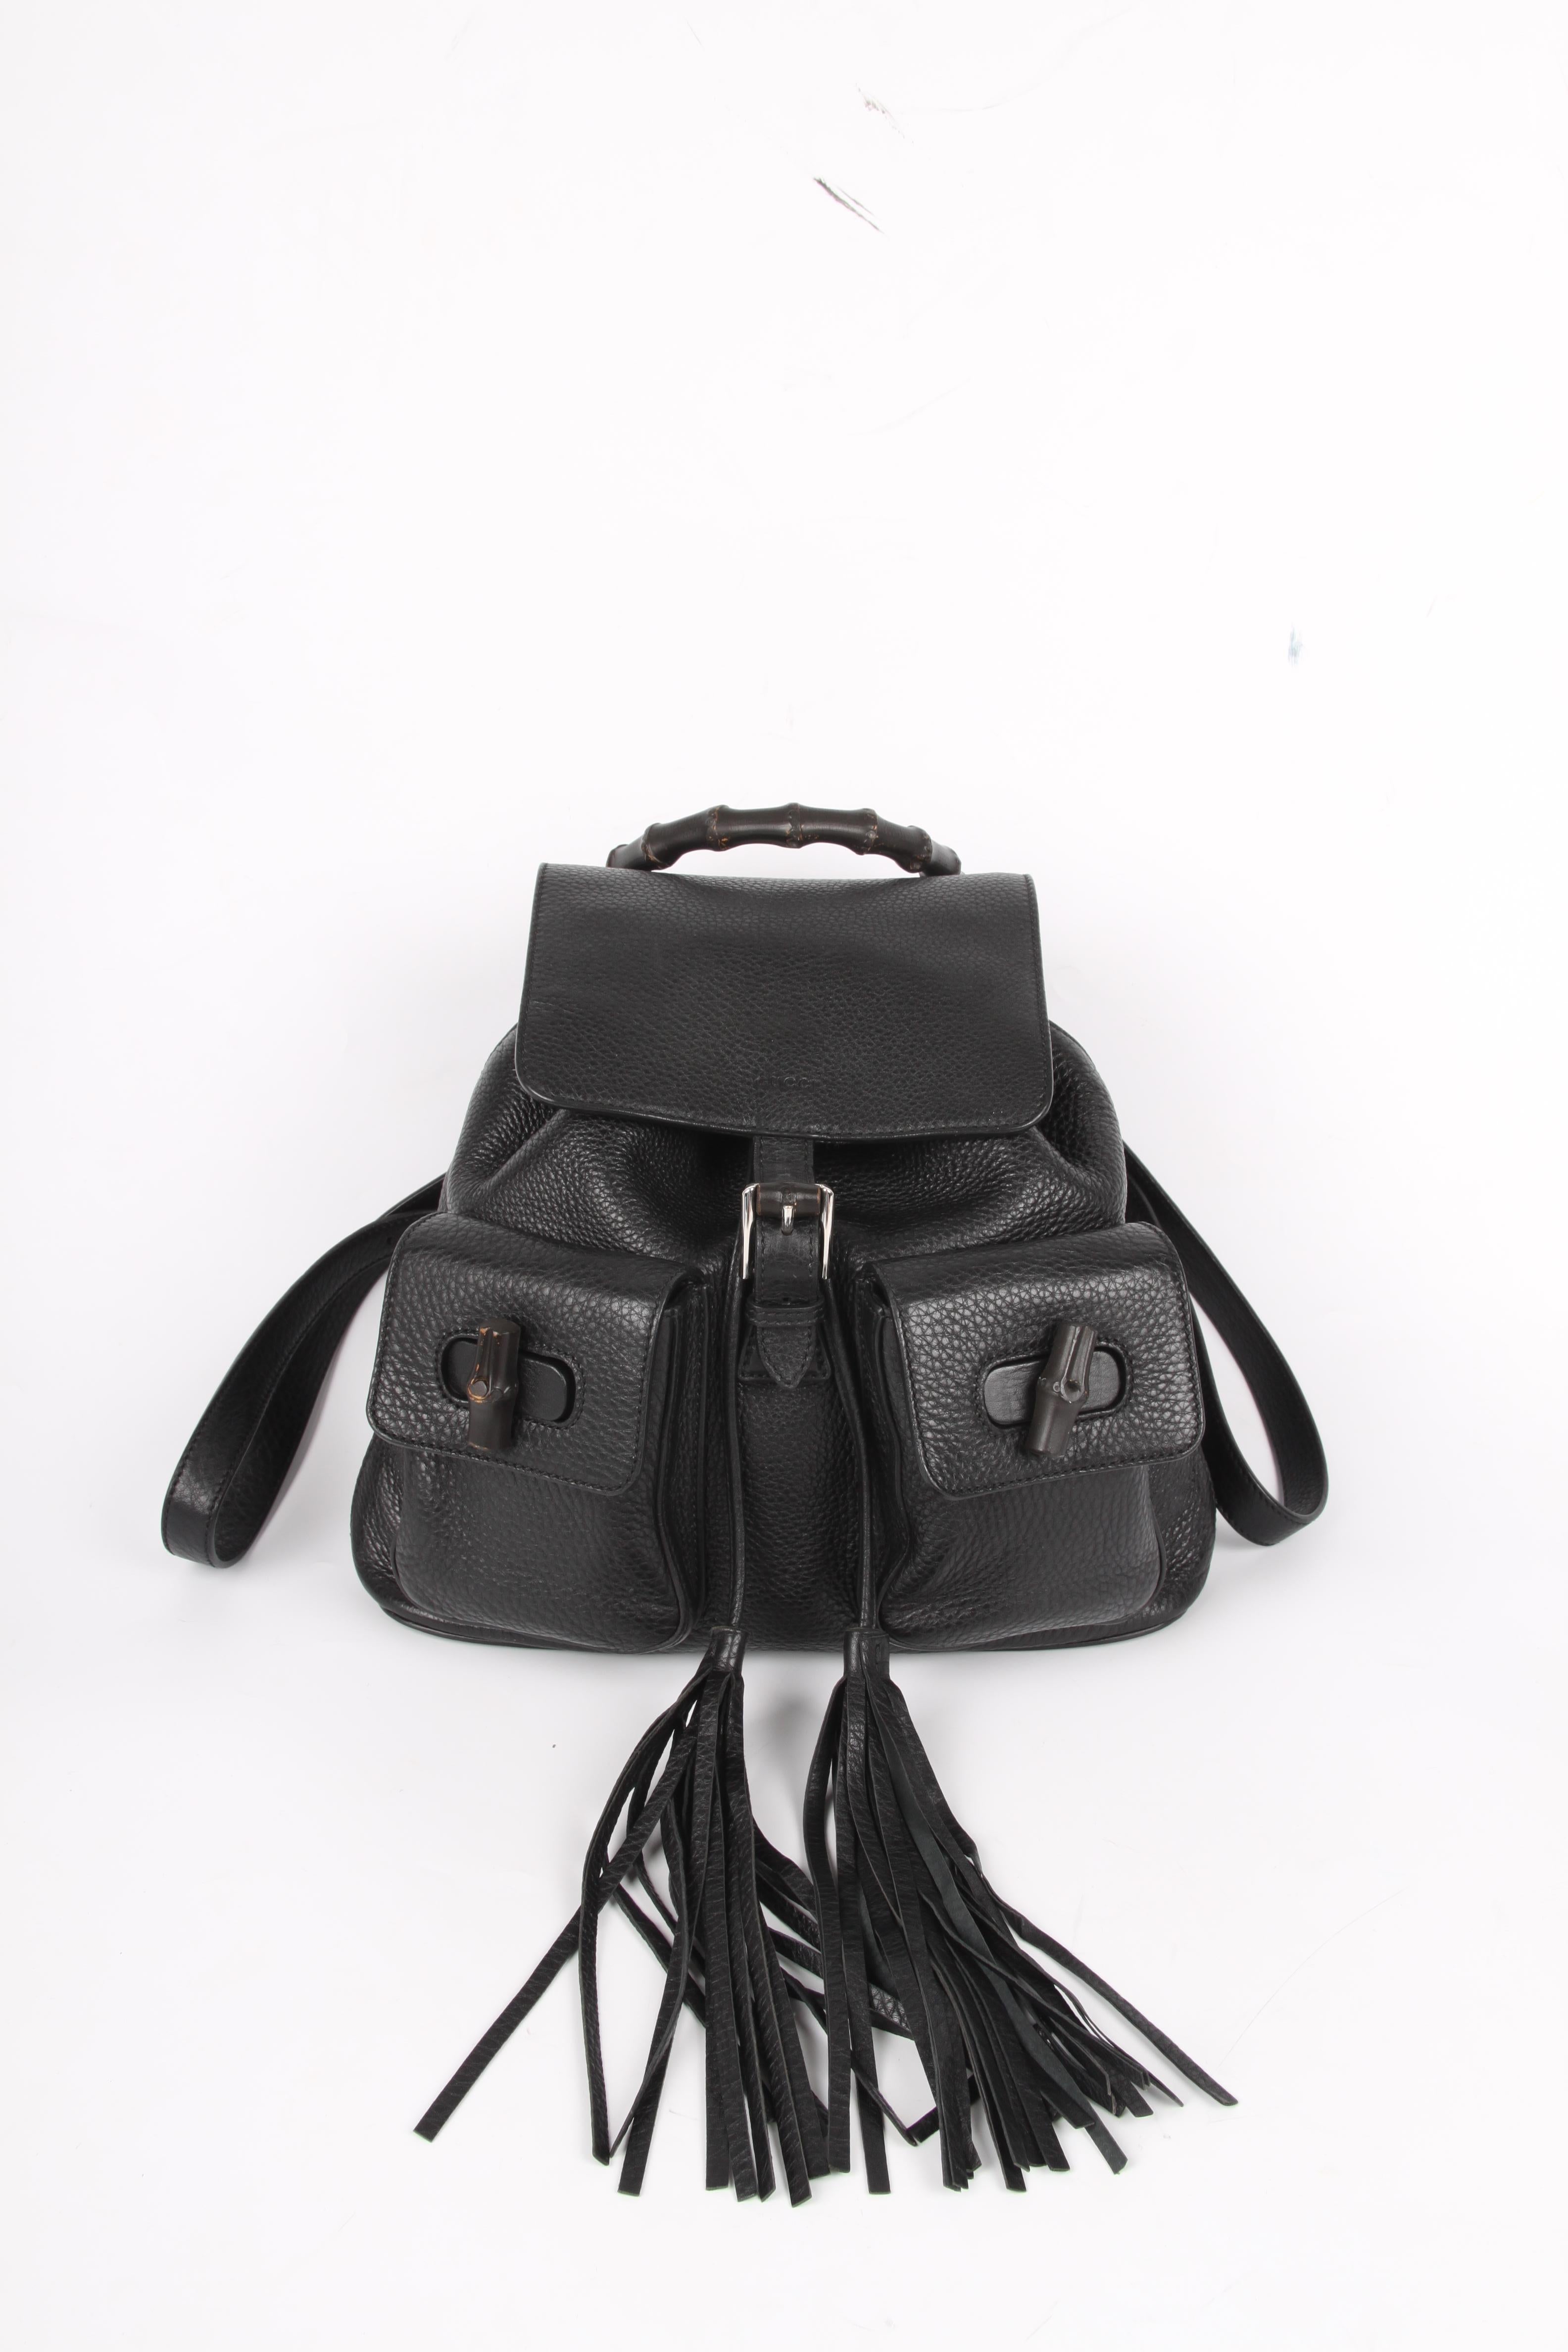 Black Gucci backpack in a compact size with black bamboo detailing and silver-tone hardware.

Crafted from black calfskin leather with a visible grain. On top you will find a black bamboo handle, the bag has drawstring closure underneath the flap.